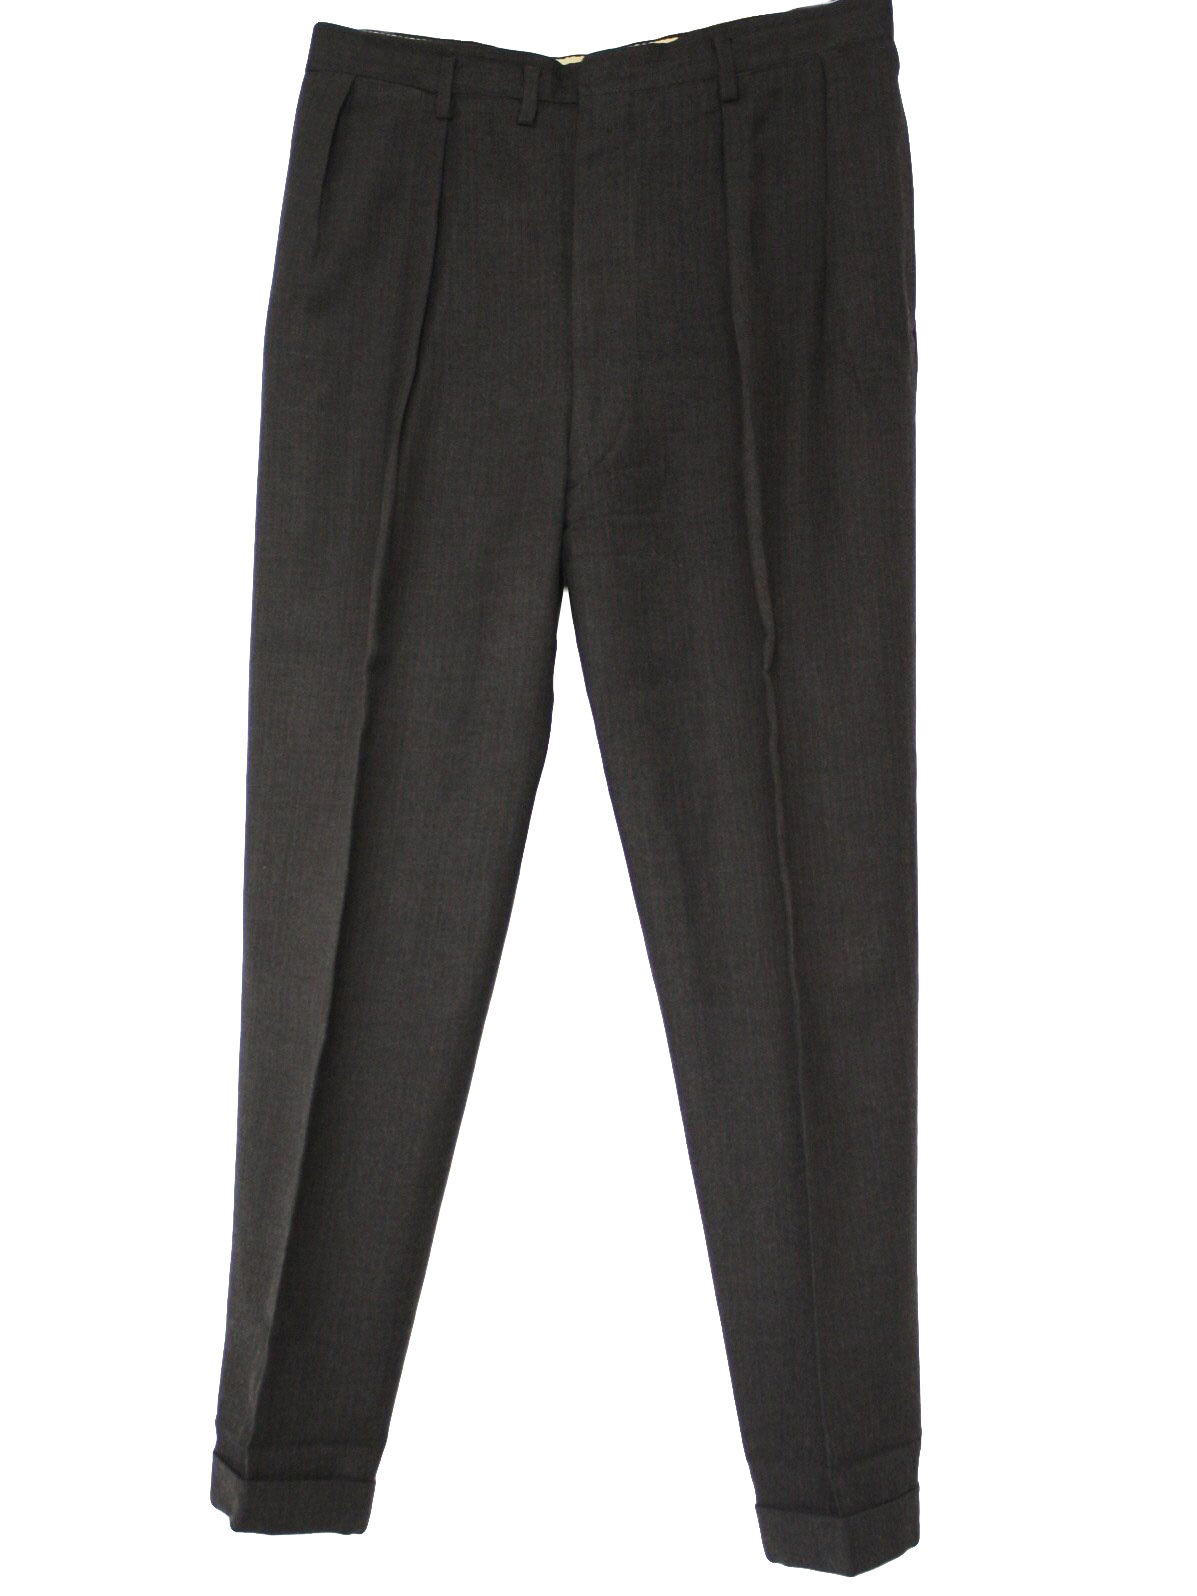 Retro 50s Pants: 50s -No Label- Mens charcoal, rust striped wool ...